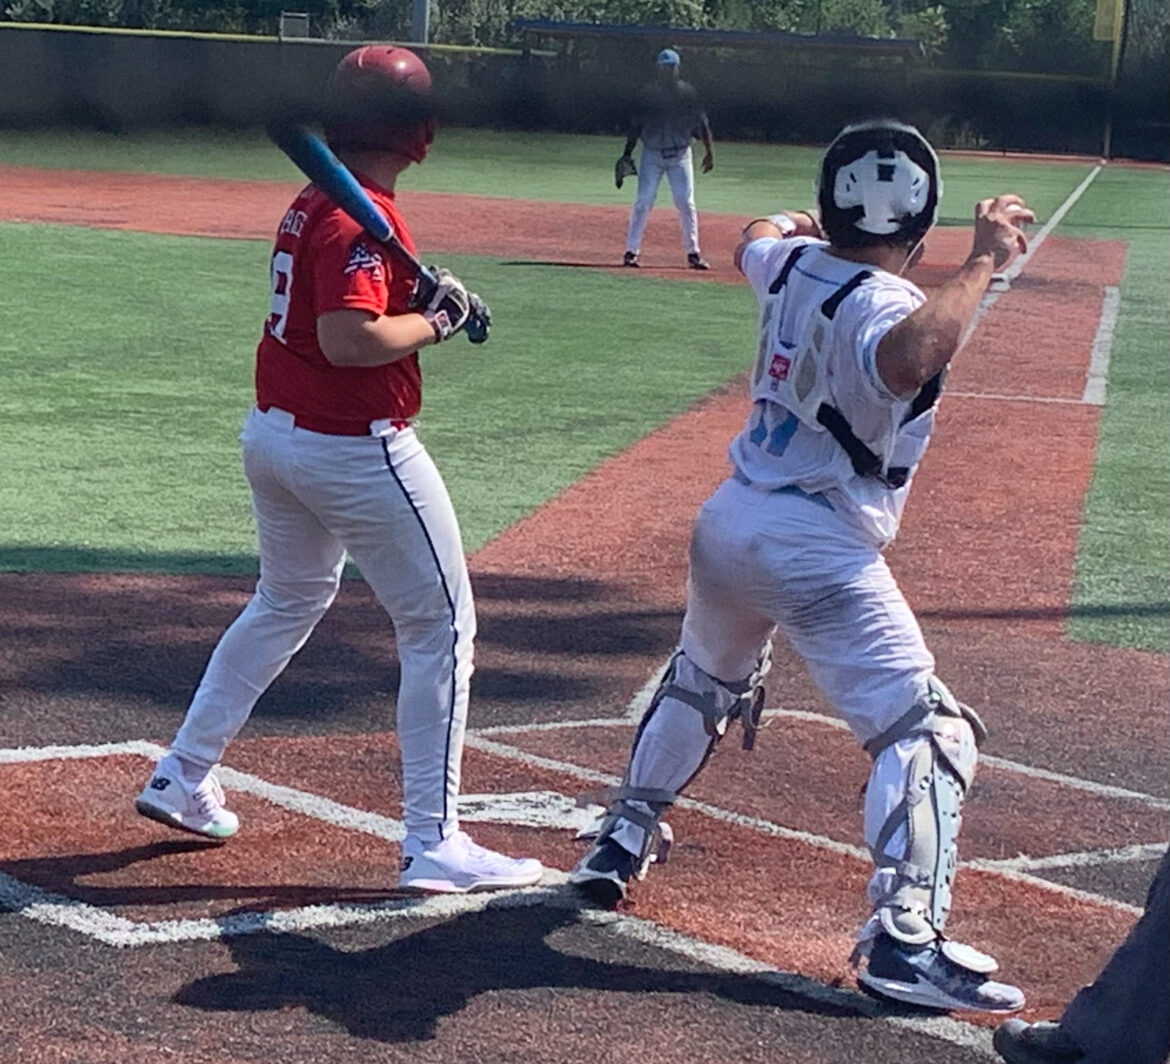 Donahue helps Sandlot Baseball close out 15U Labor Day Blast with a win